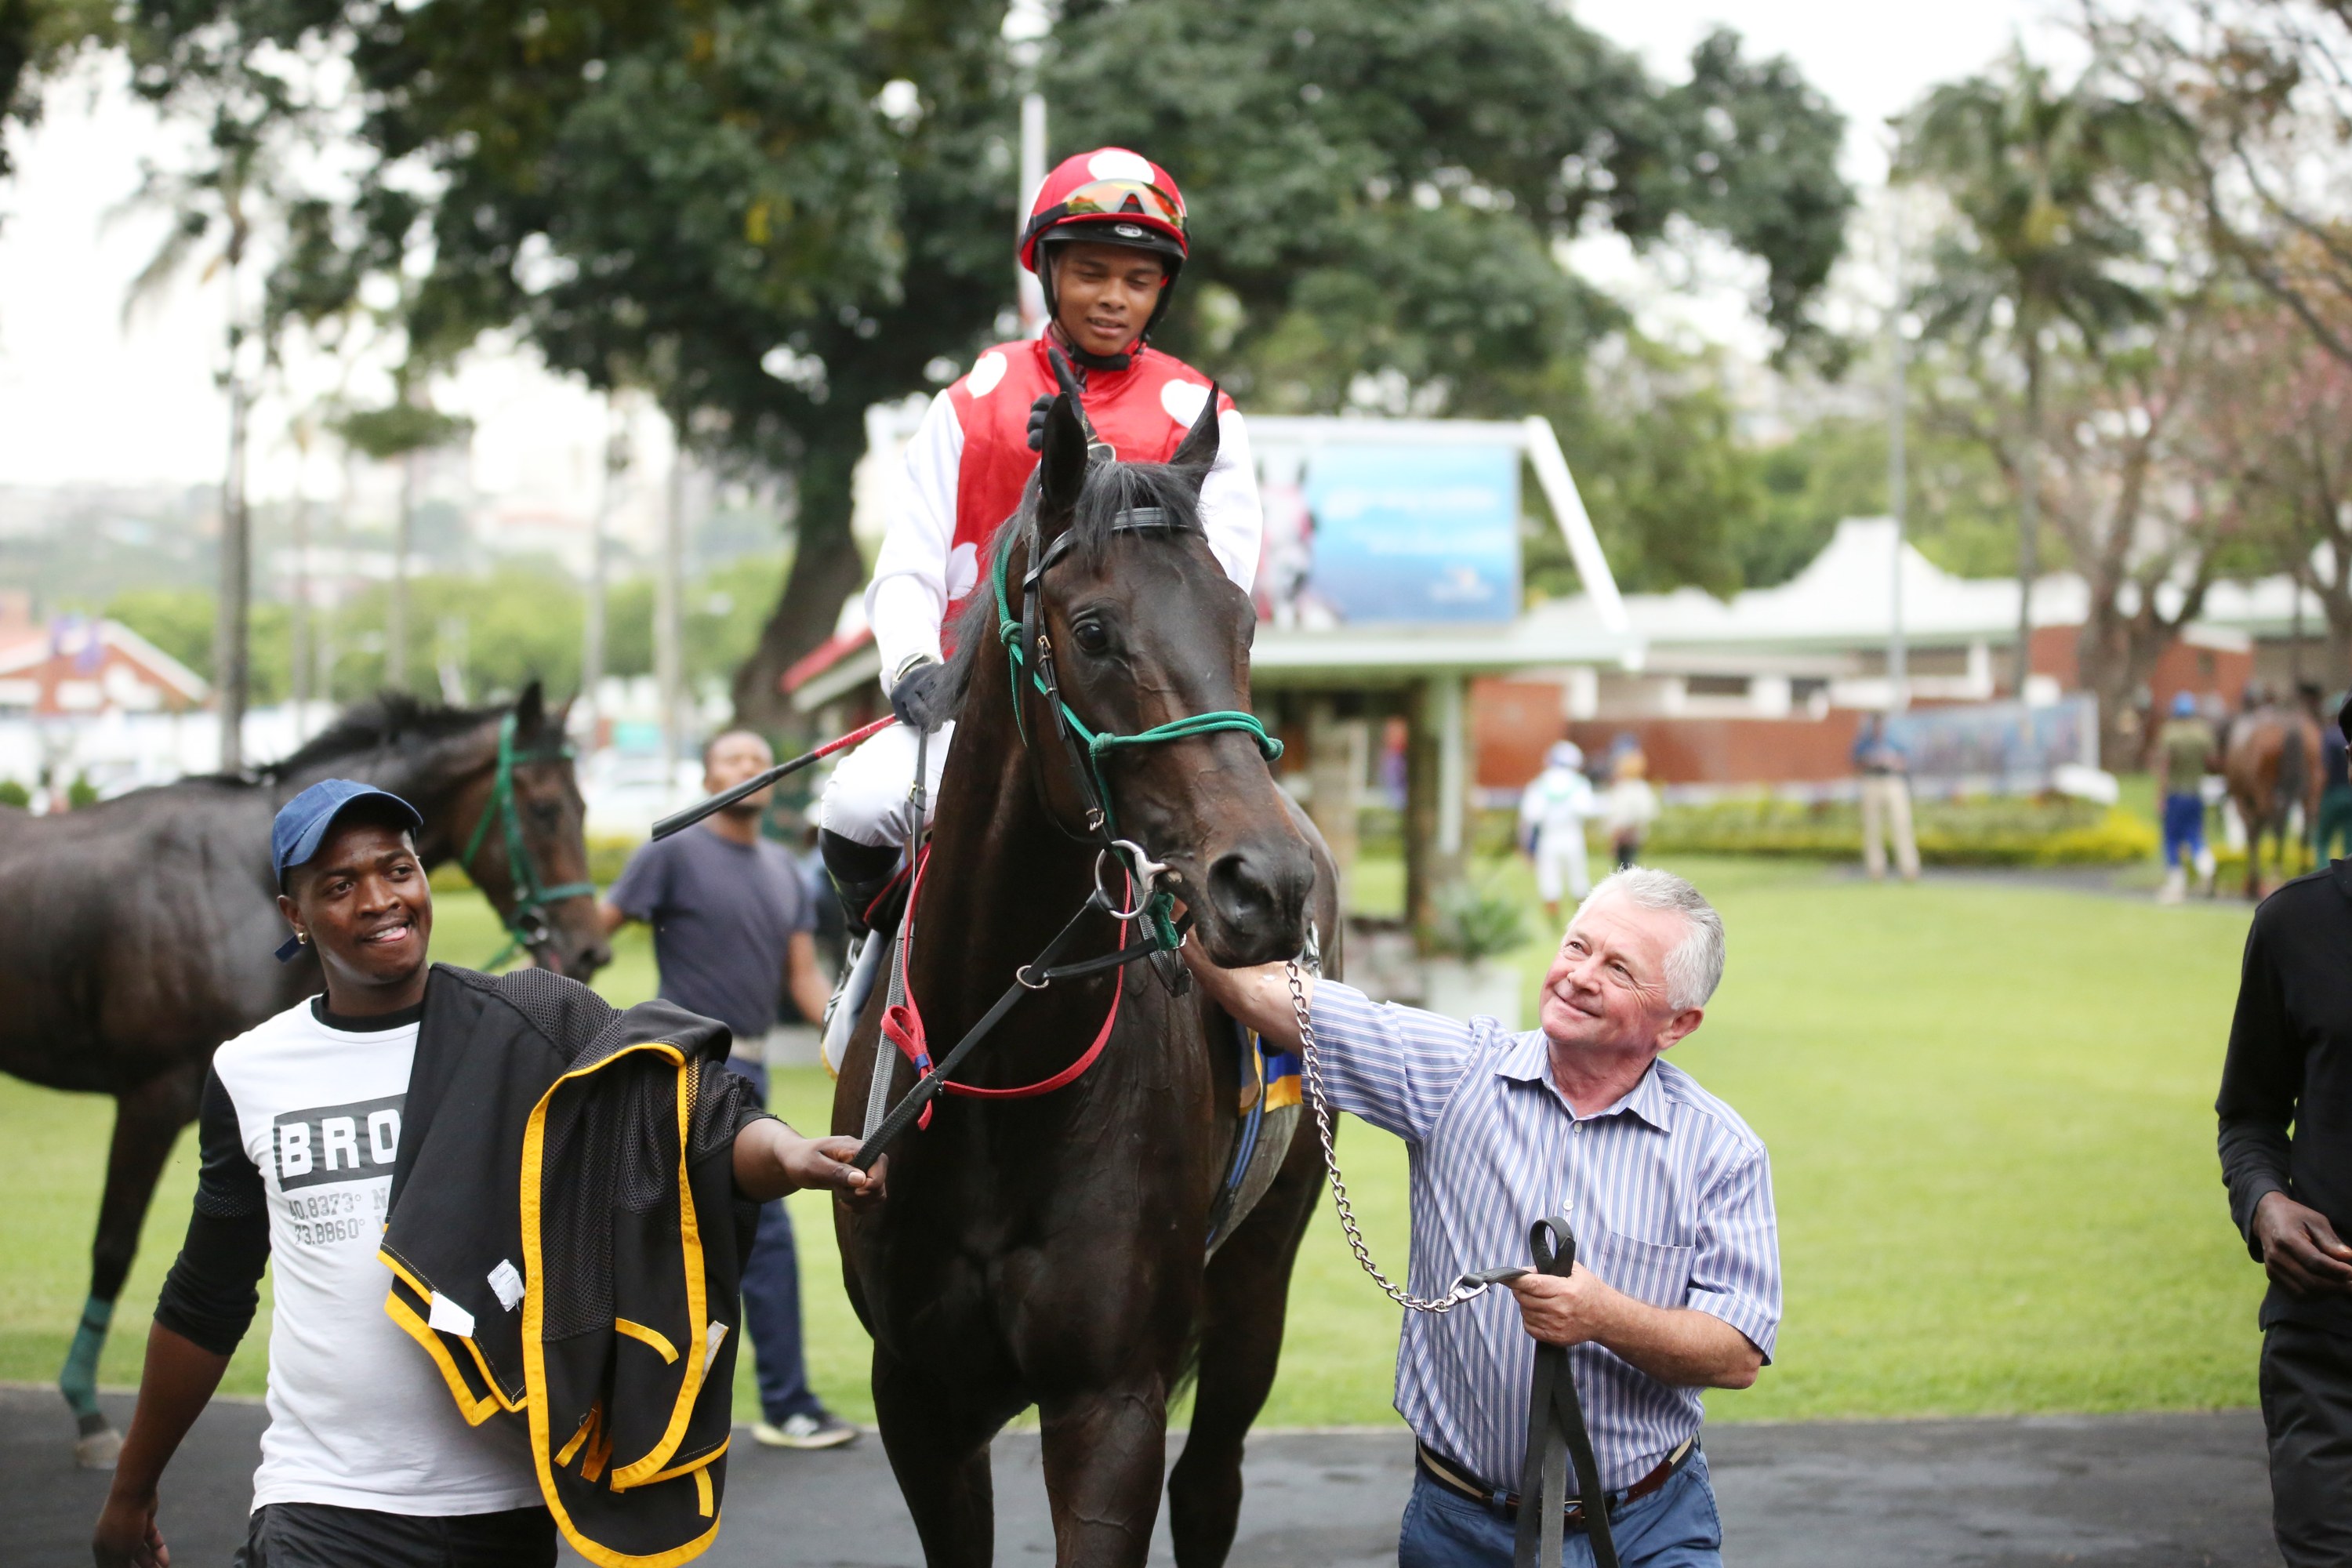 KZN-breds Win Six Of Nine Races At Greyville